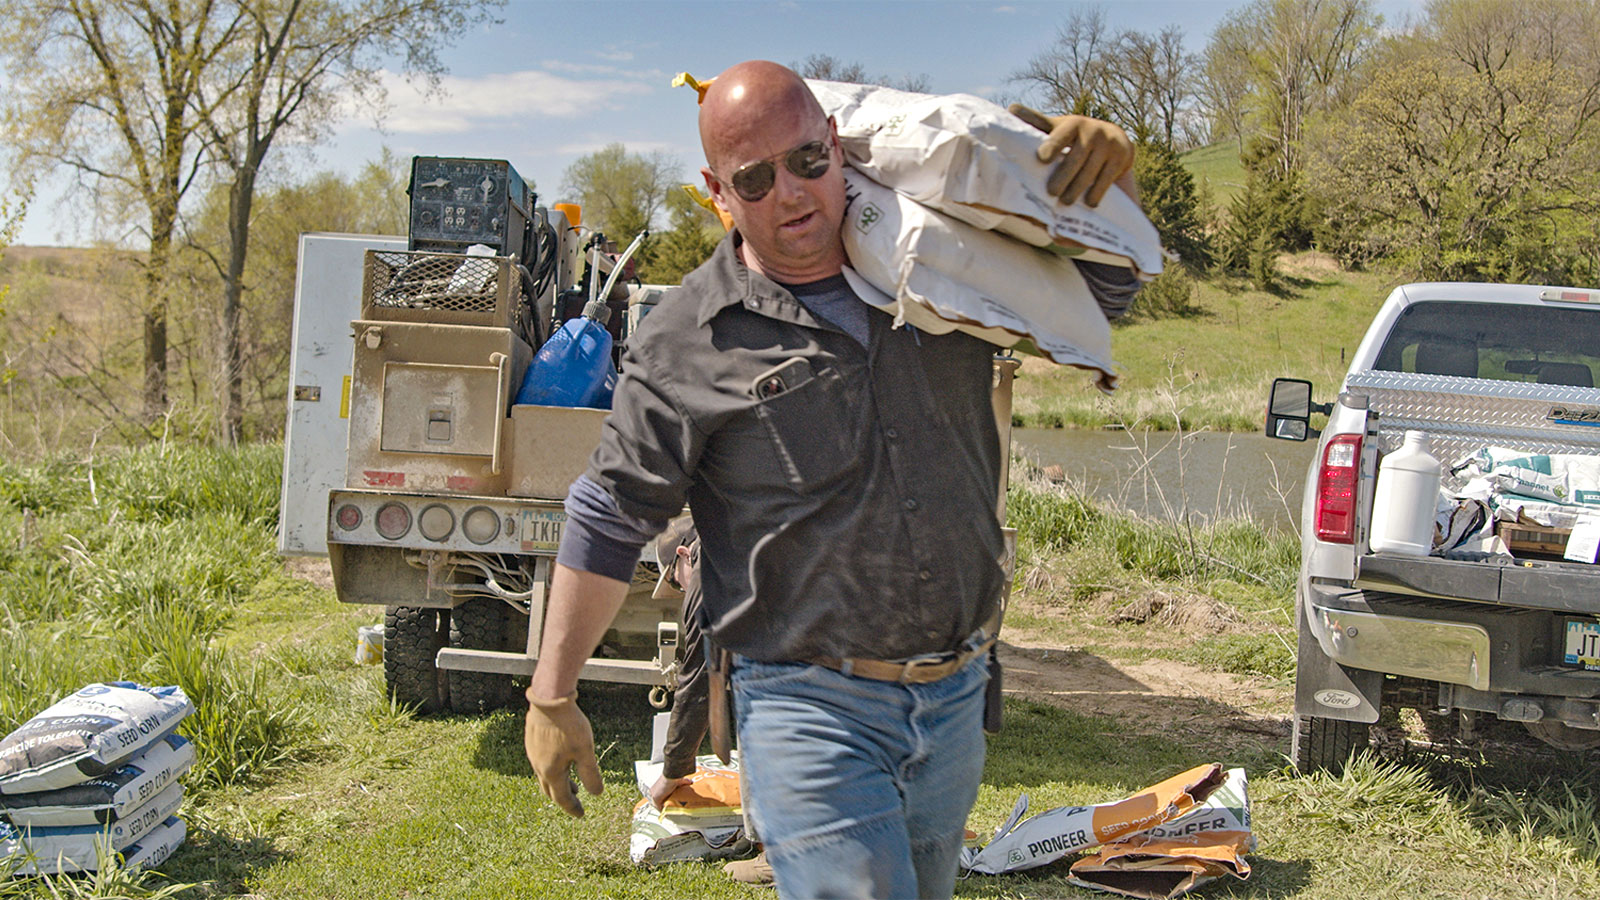 a man on a farm carries a large white sack over his shoulder